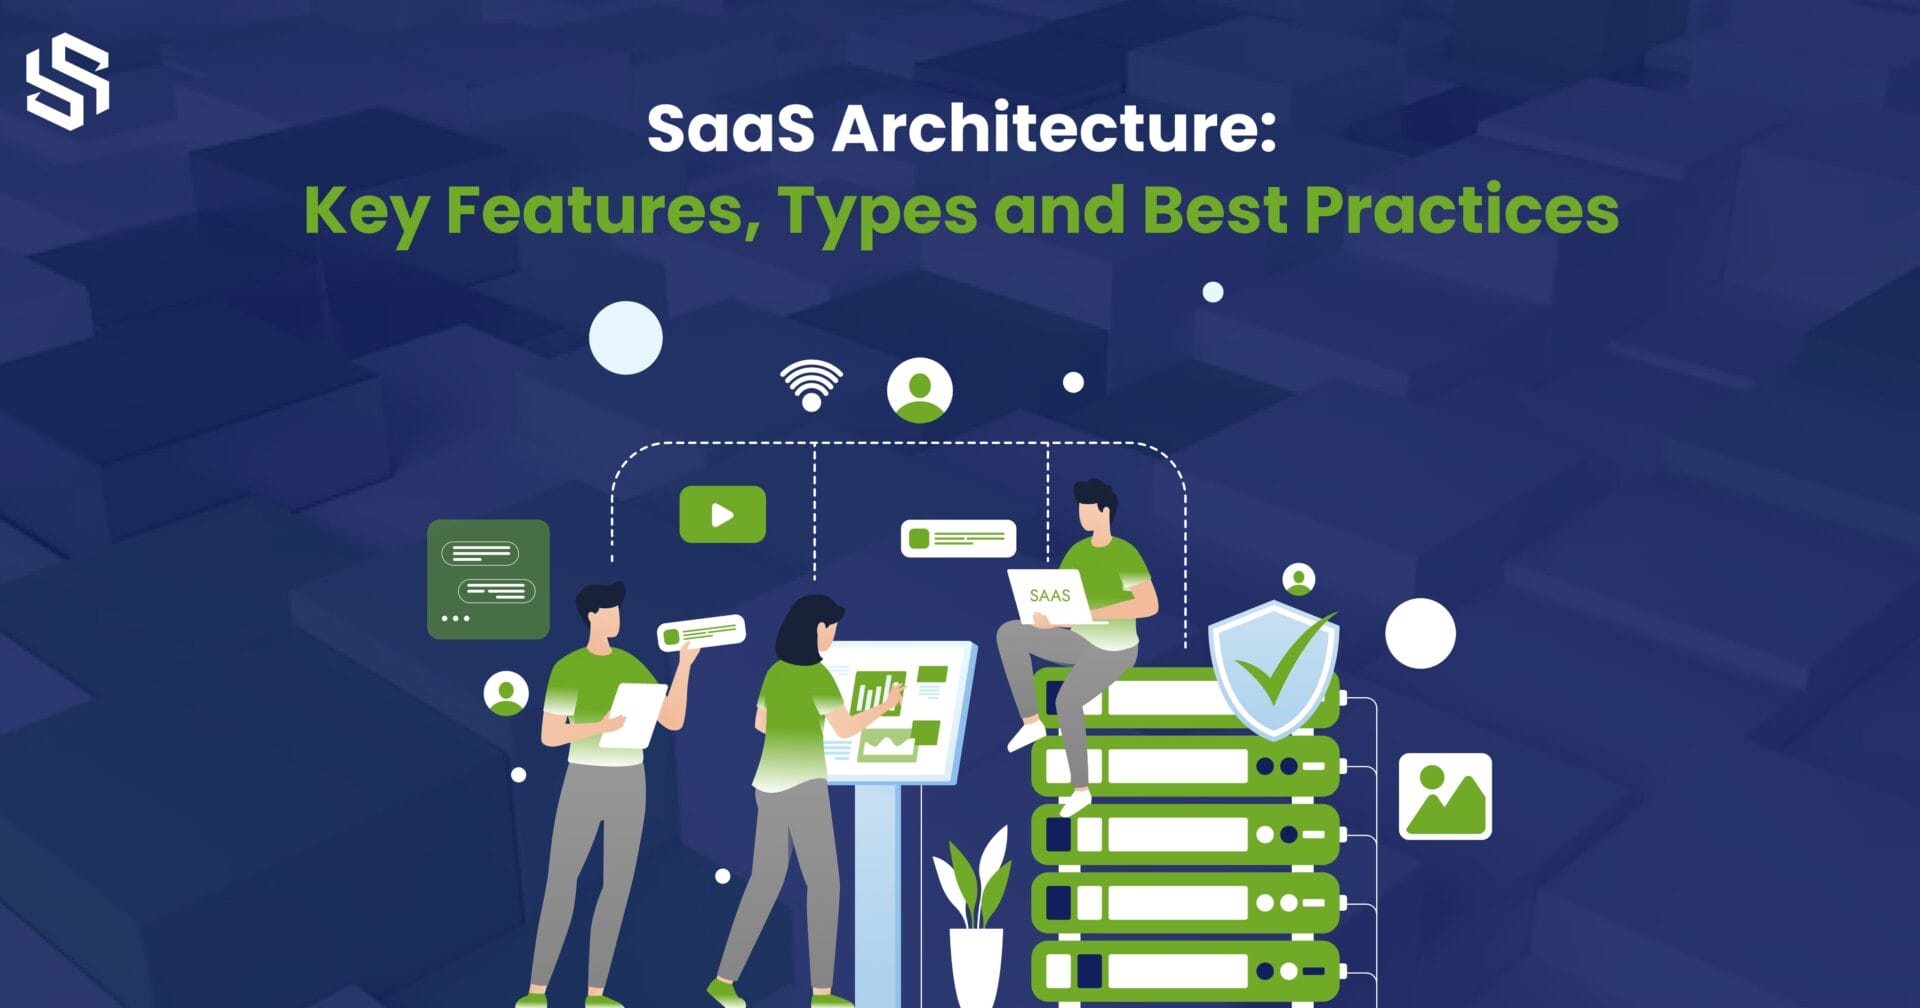 SaaS Architecture Key Features, Types and Best Practices